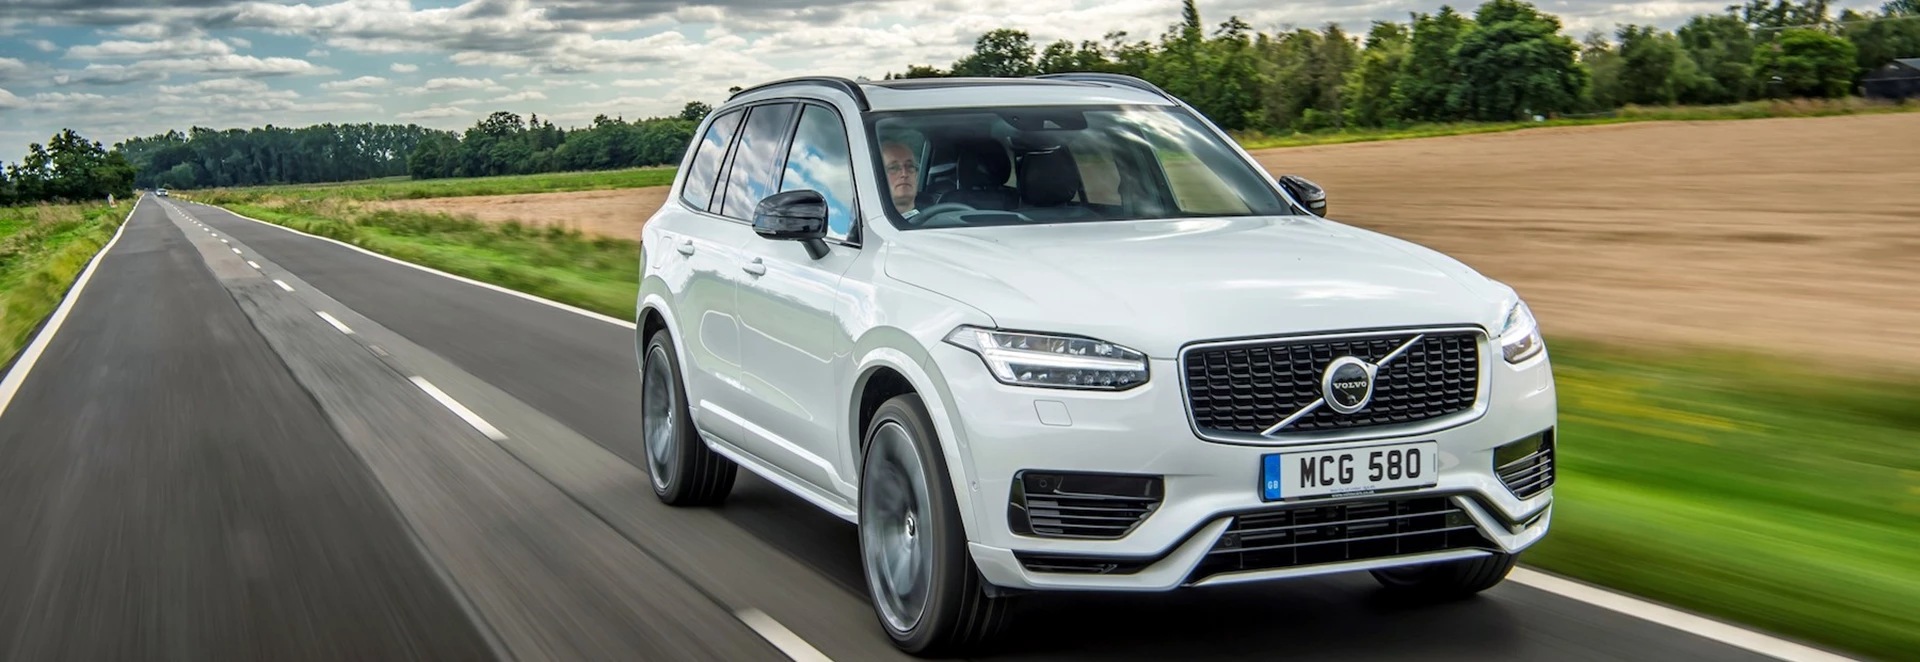 Volvo XC90 T8 Plug-in Hybrid review 